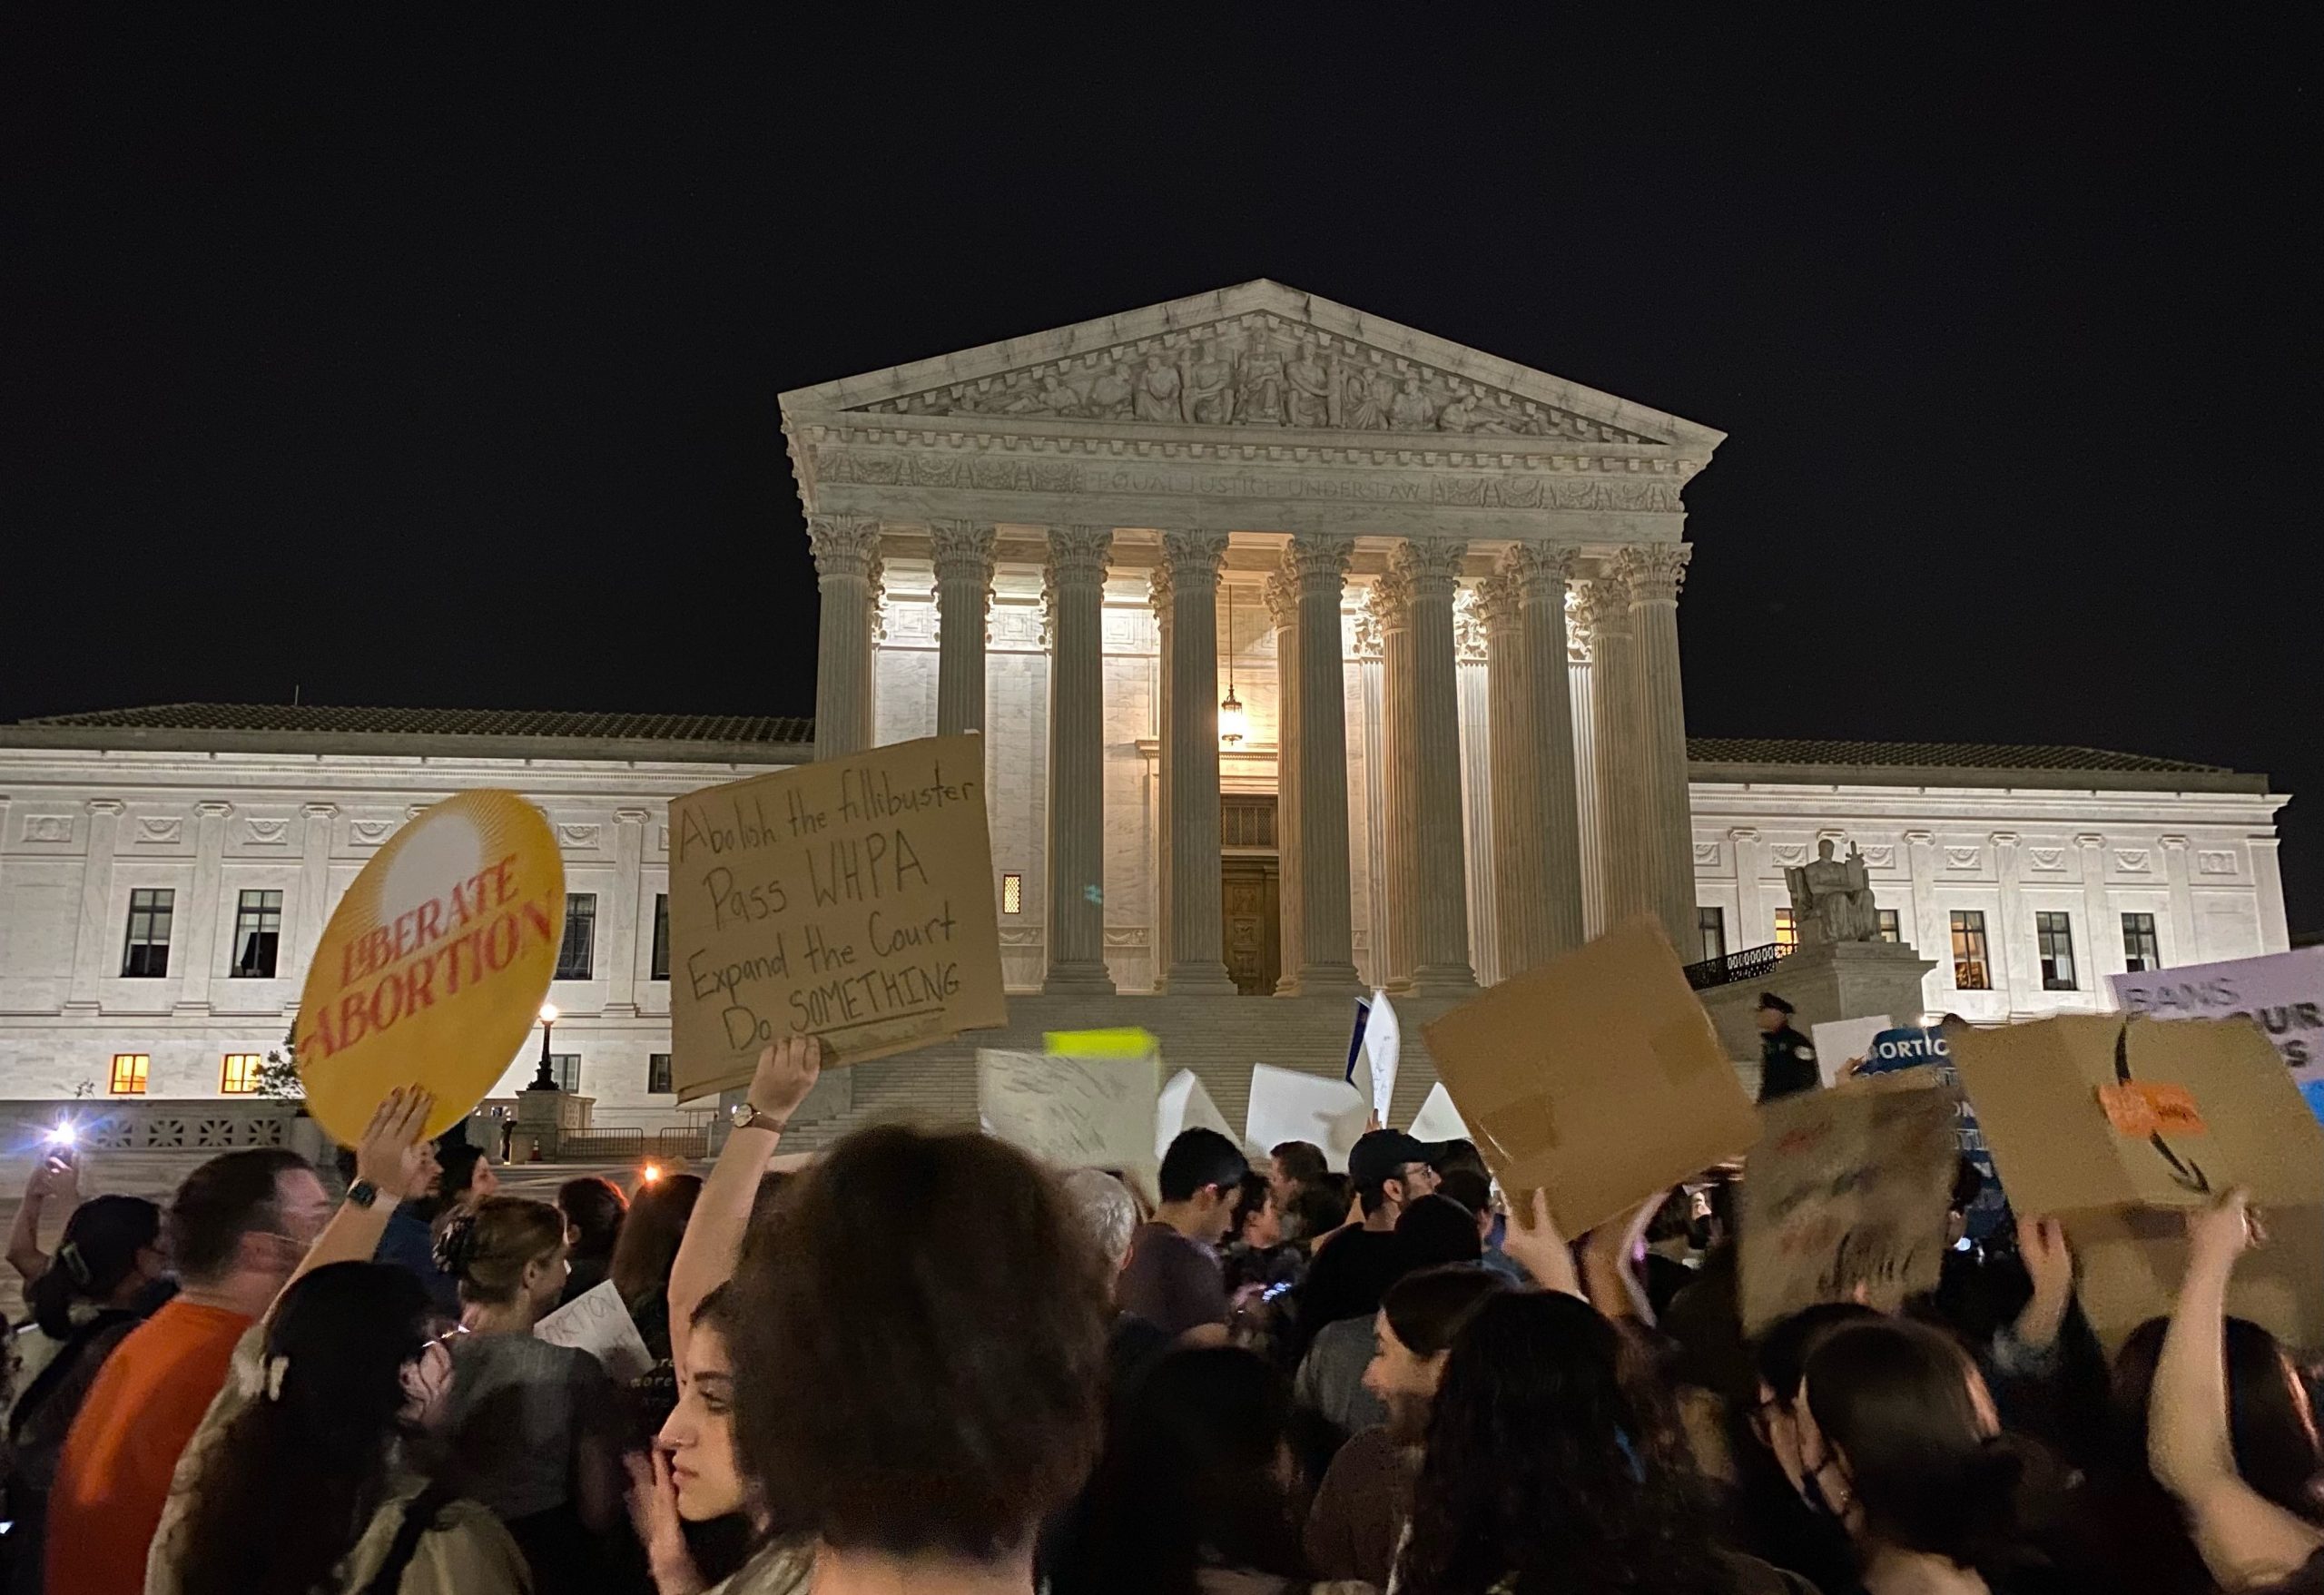 nighttime scene in front of supreme court, with crowd of people holding signs supporting abortion rights